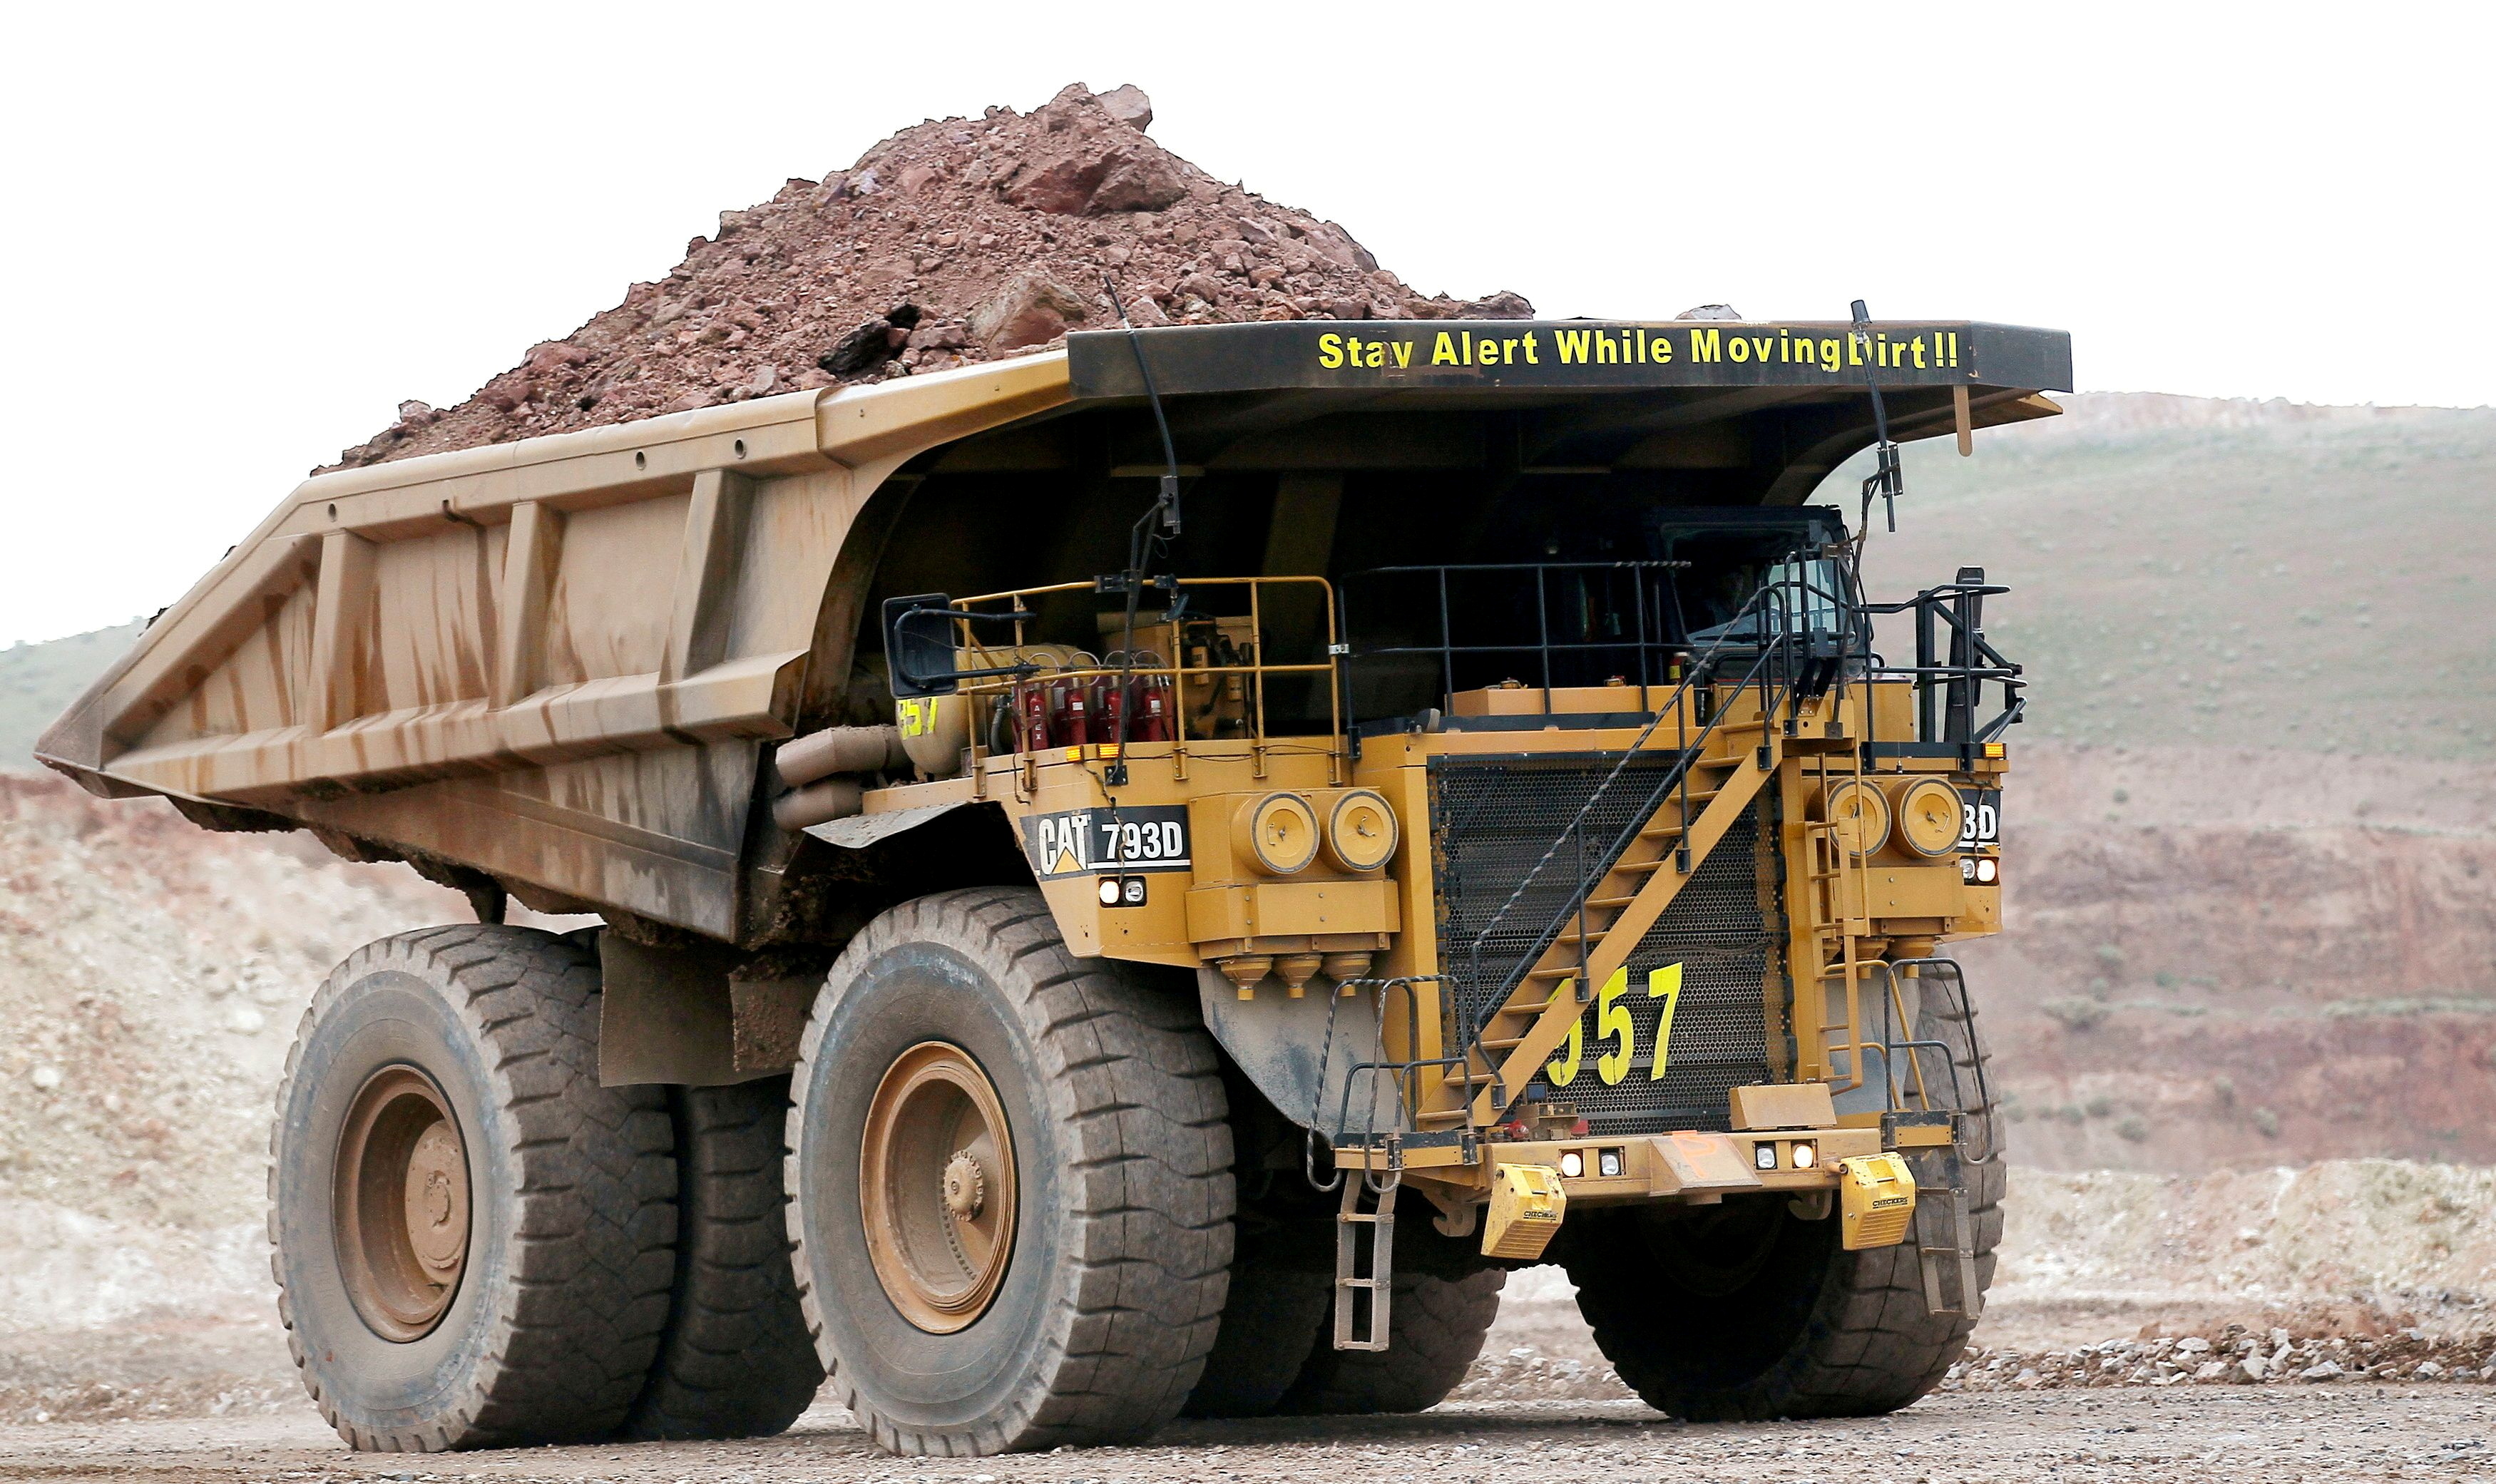 A haul truck carries a full load at a mine operation near Elko, Nevada